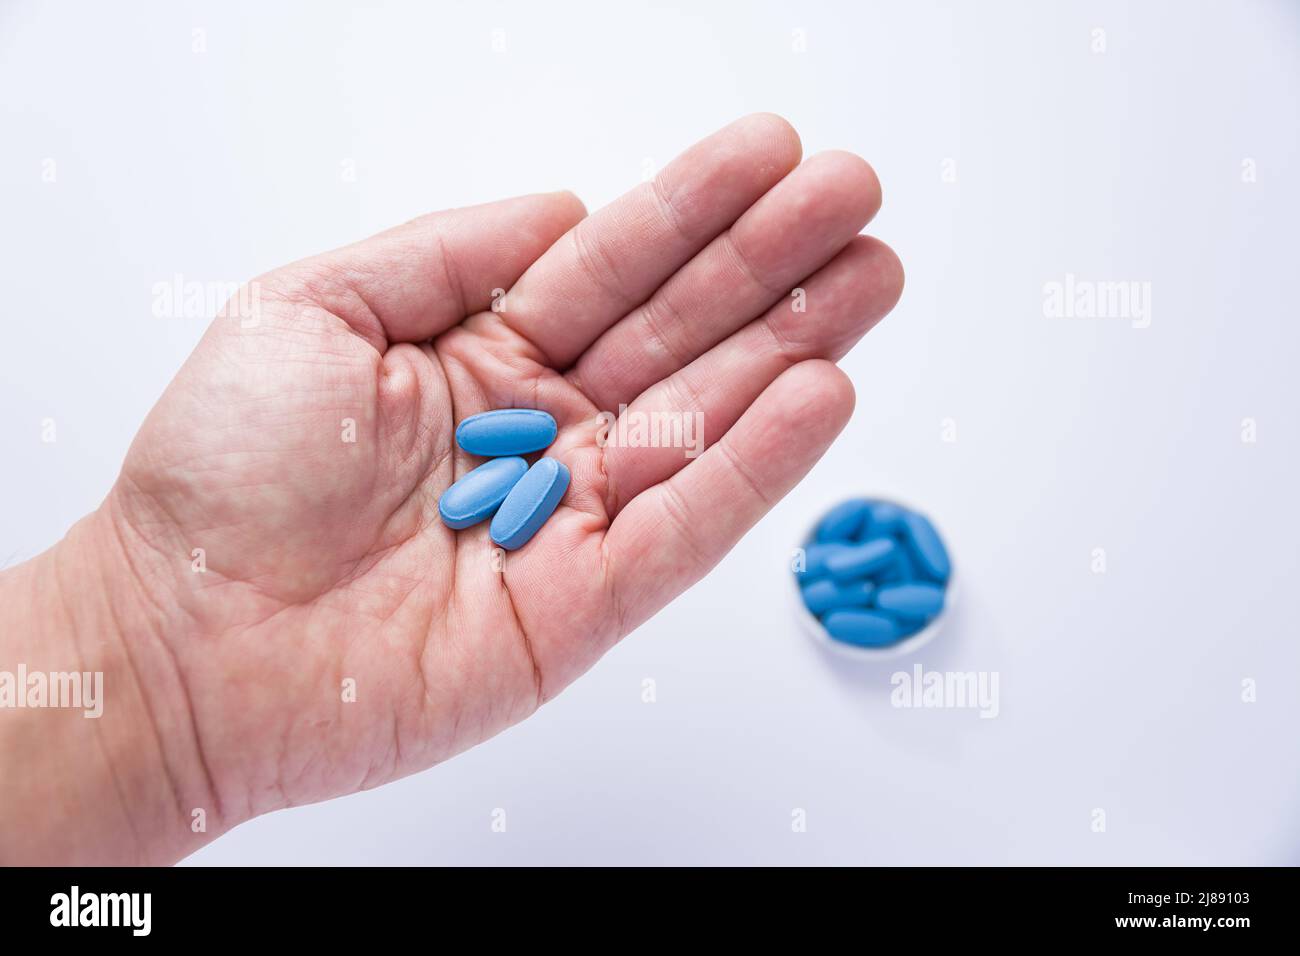 Male hand showing three pills in the palm and in the background out of focus a container full of blue tablets Stock Photo